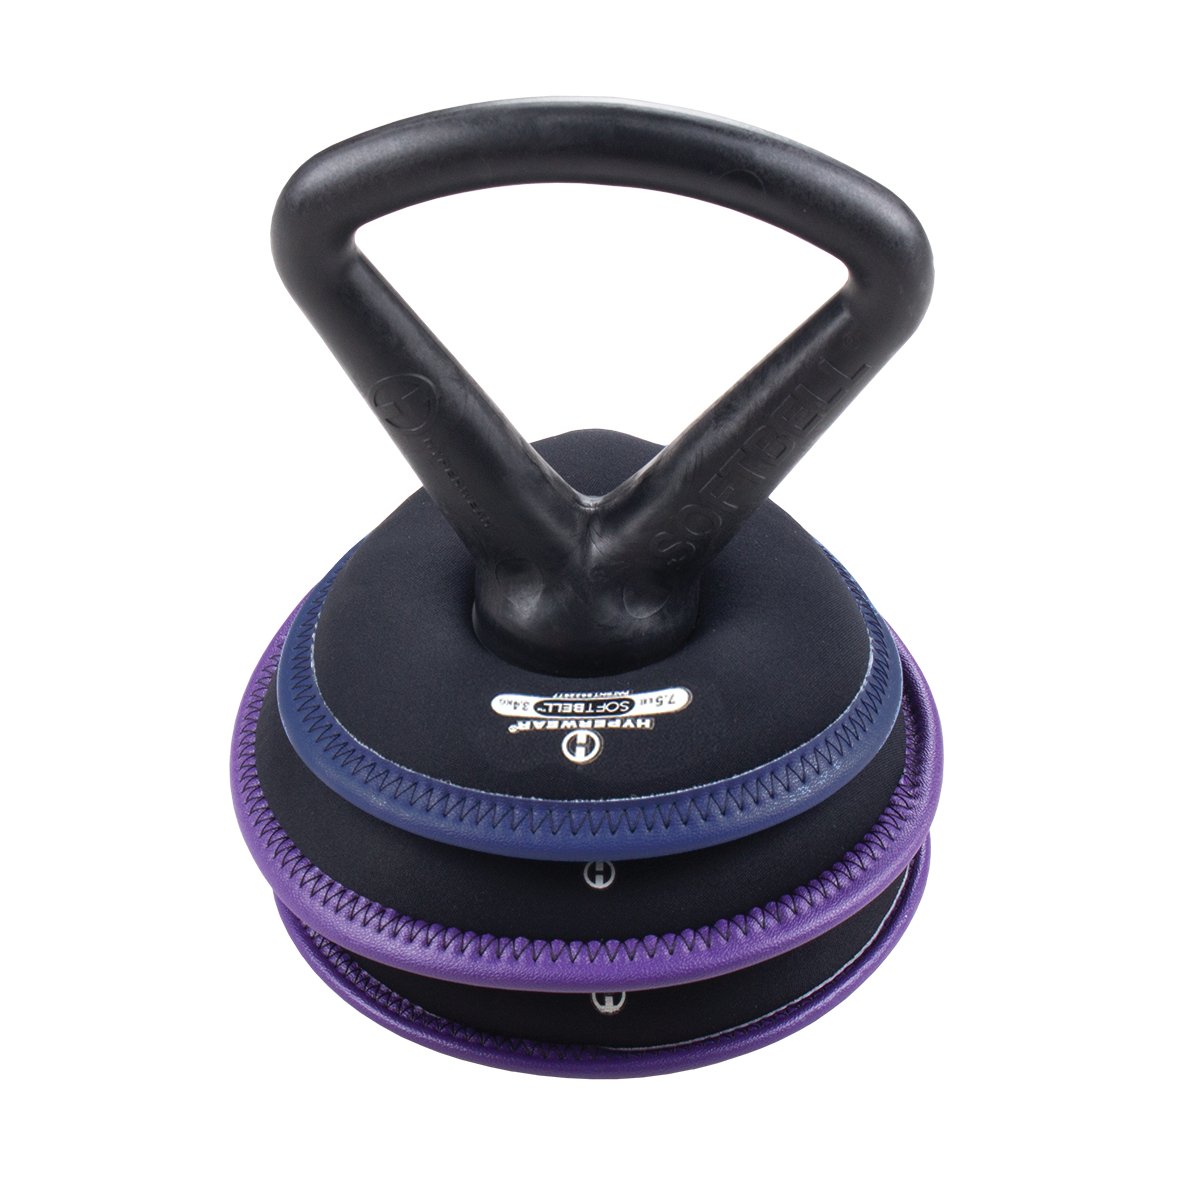 Product image of Hyperwear adjustable soft kettlebell